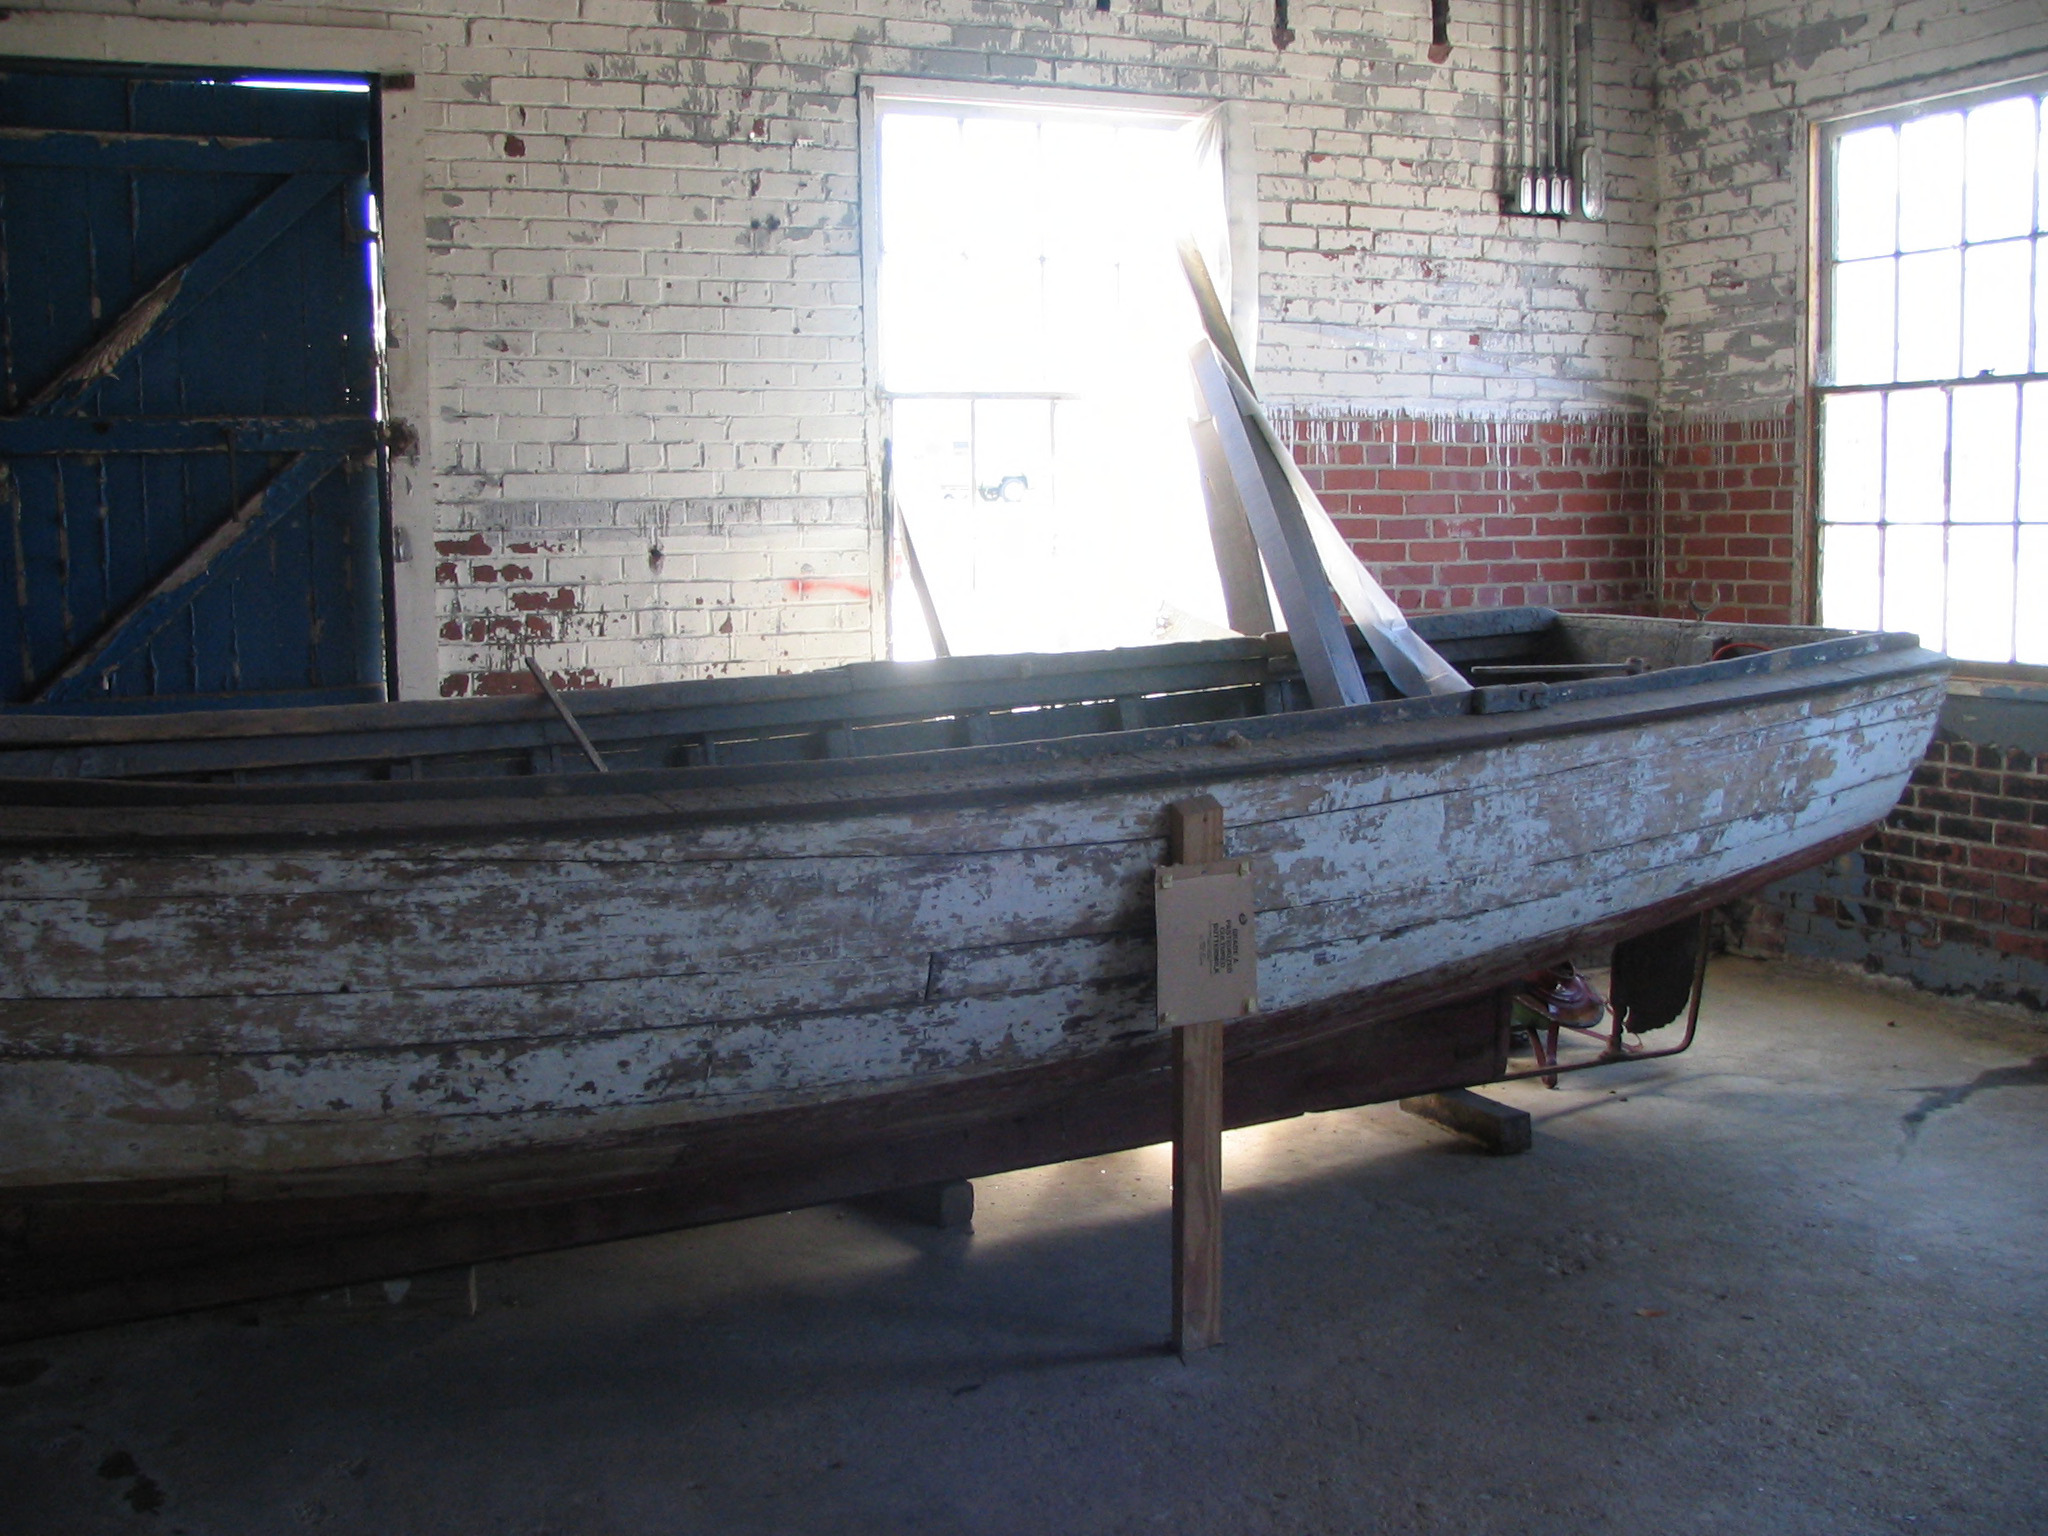 old wooden boat sitting on a frame in an empty room